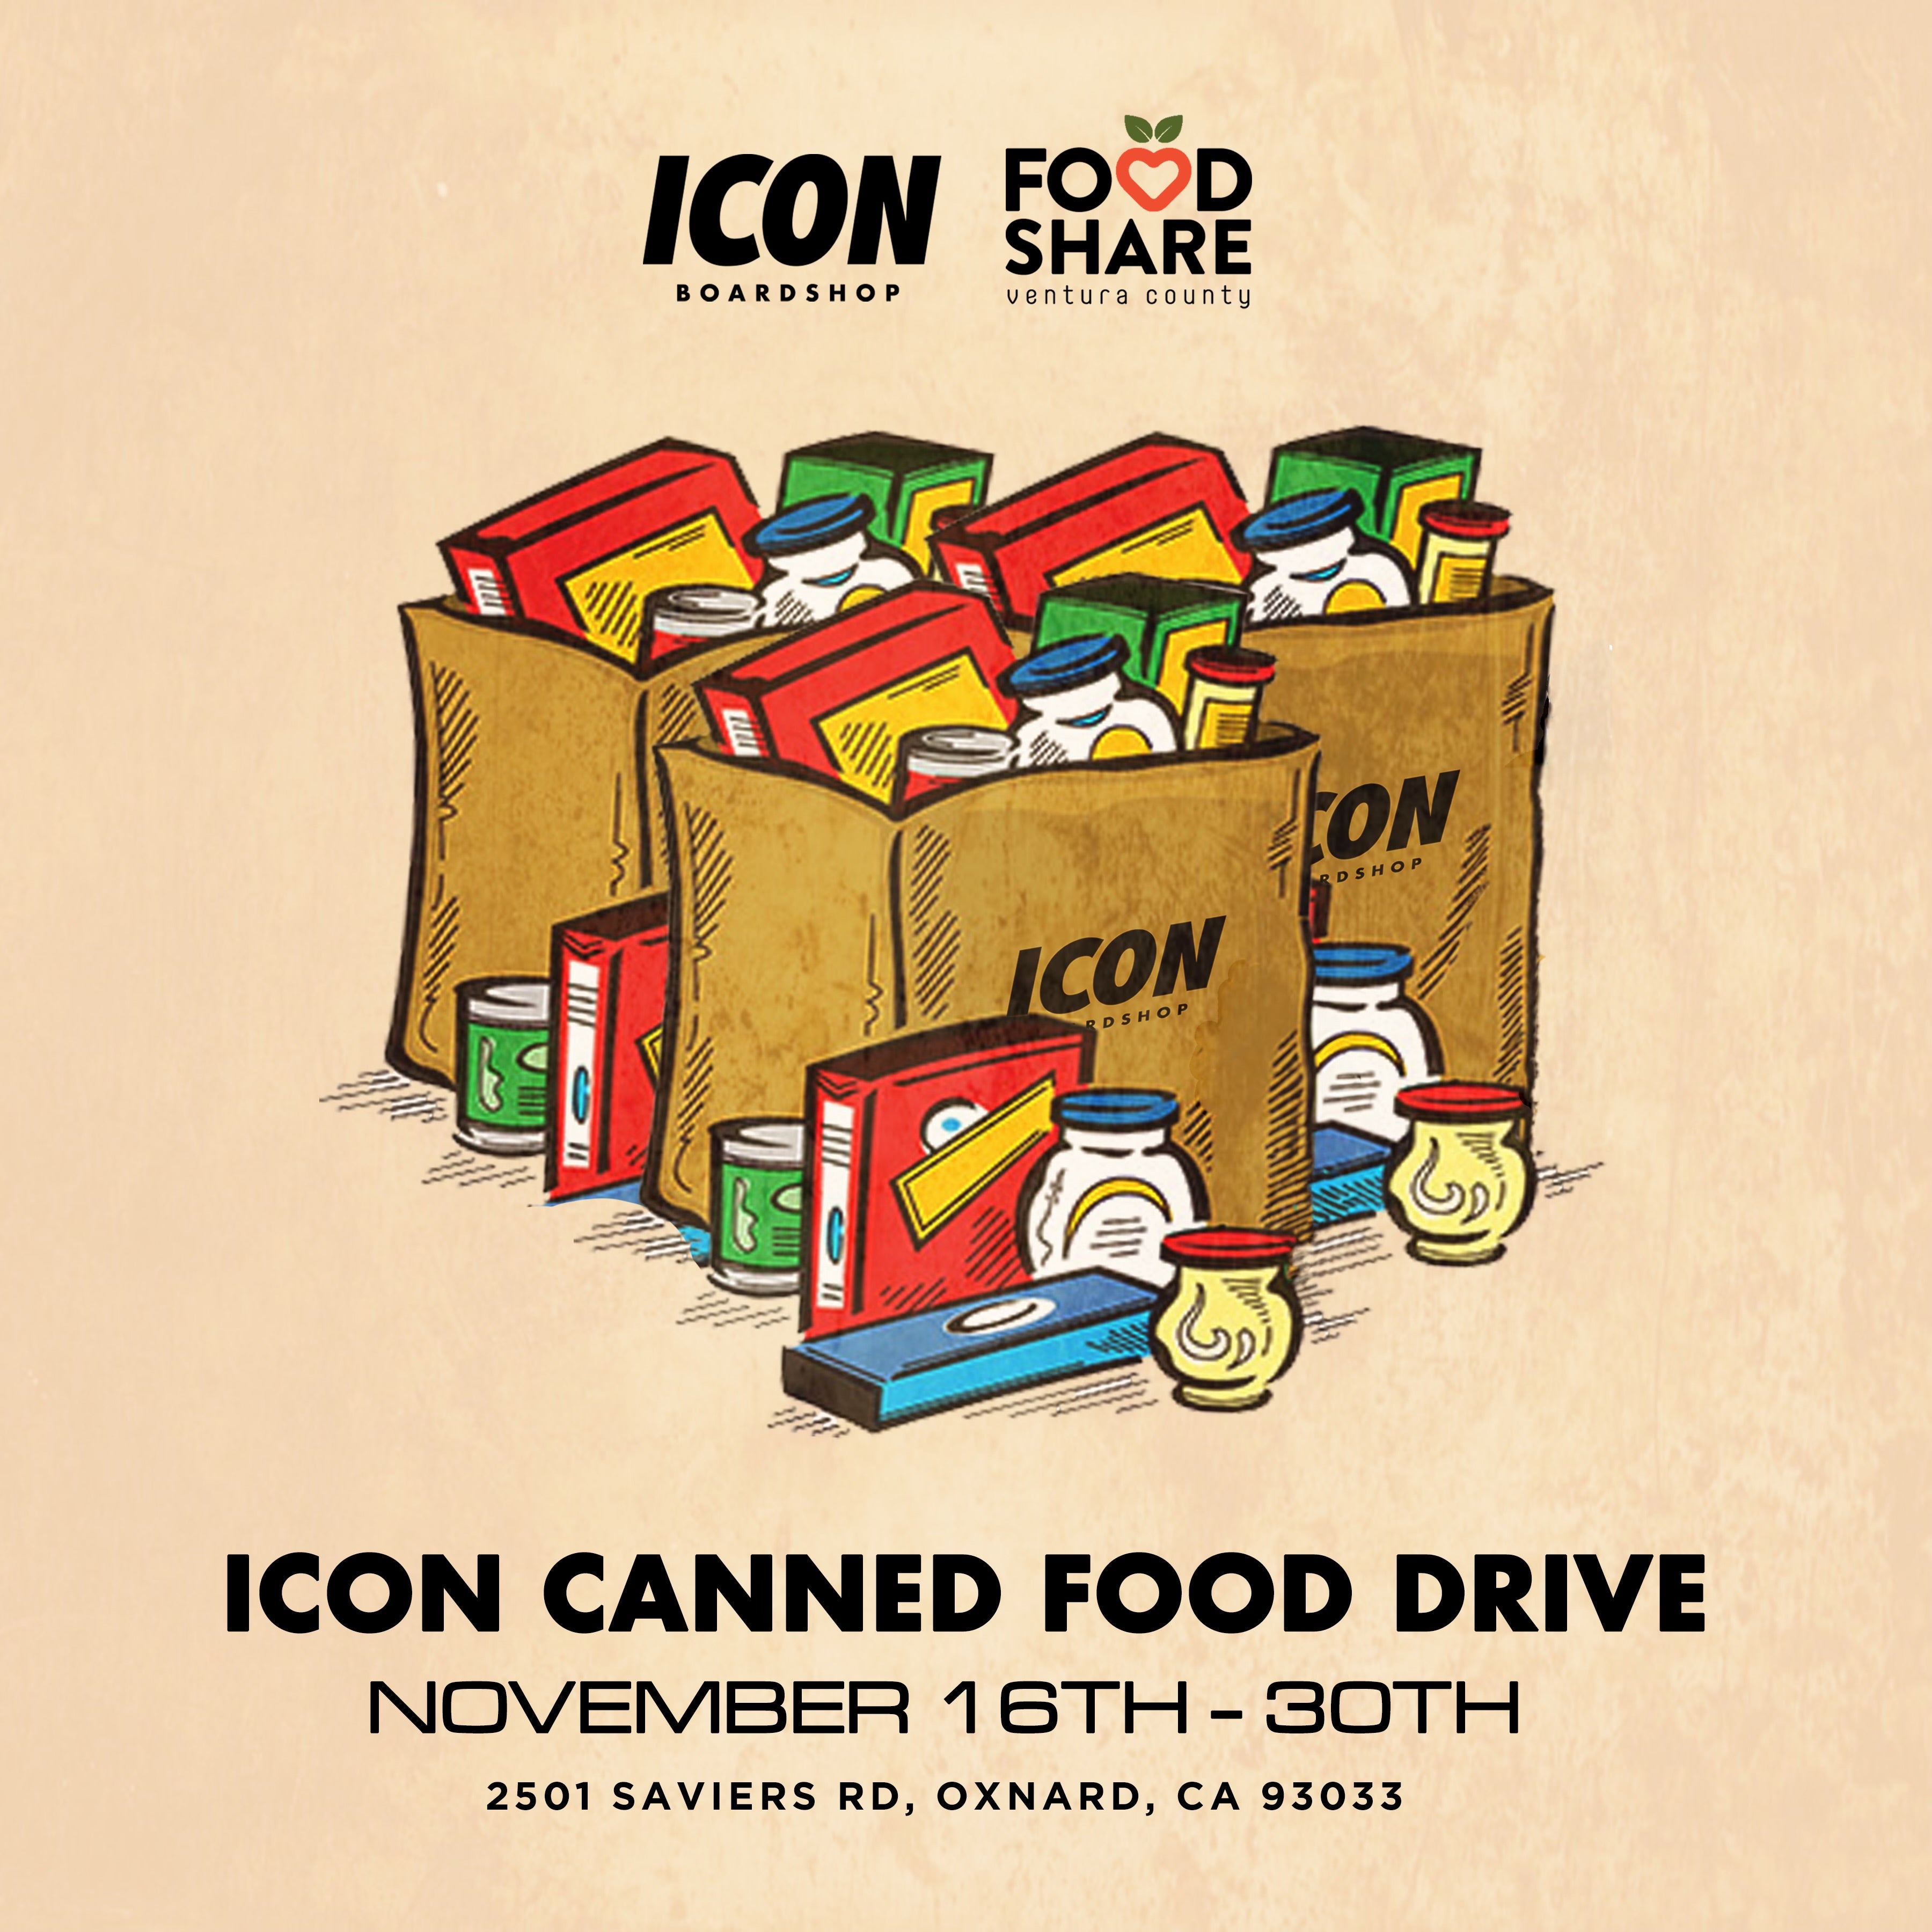 Icon Boardshop's Canned Food Drive: Nourishing the Community Together